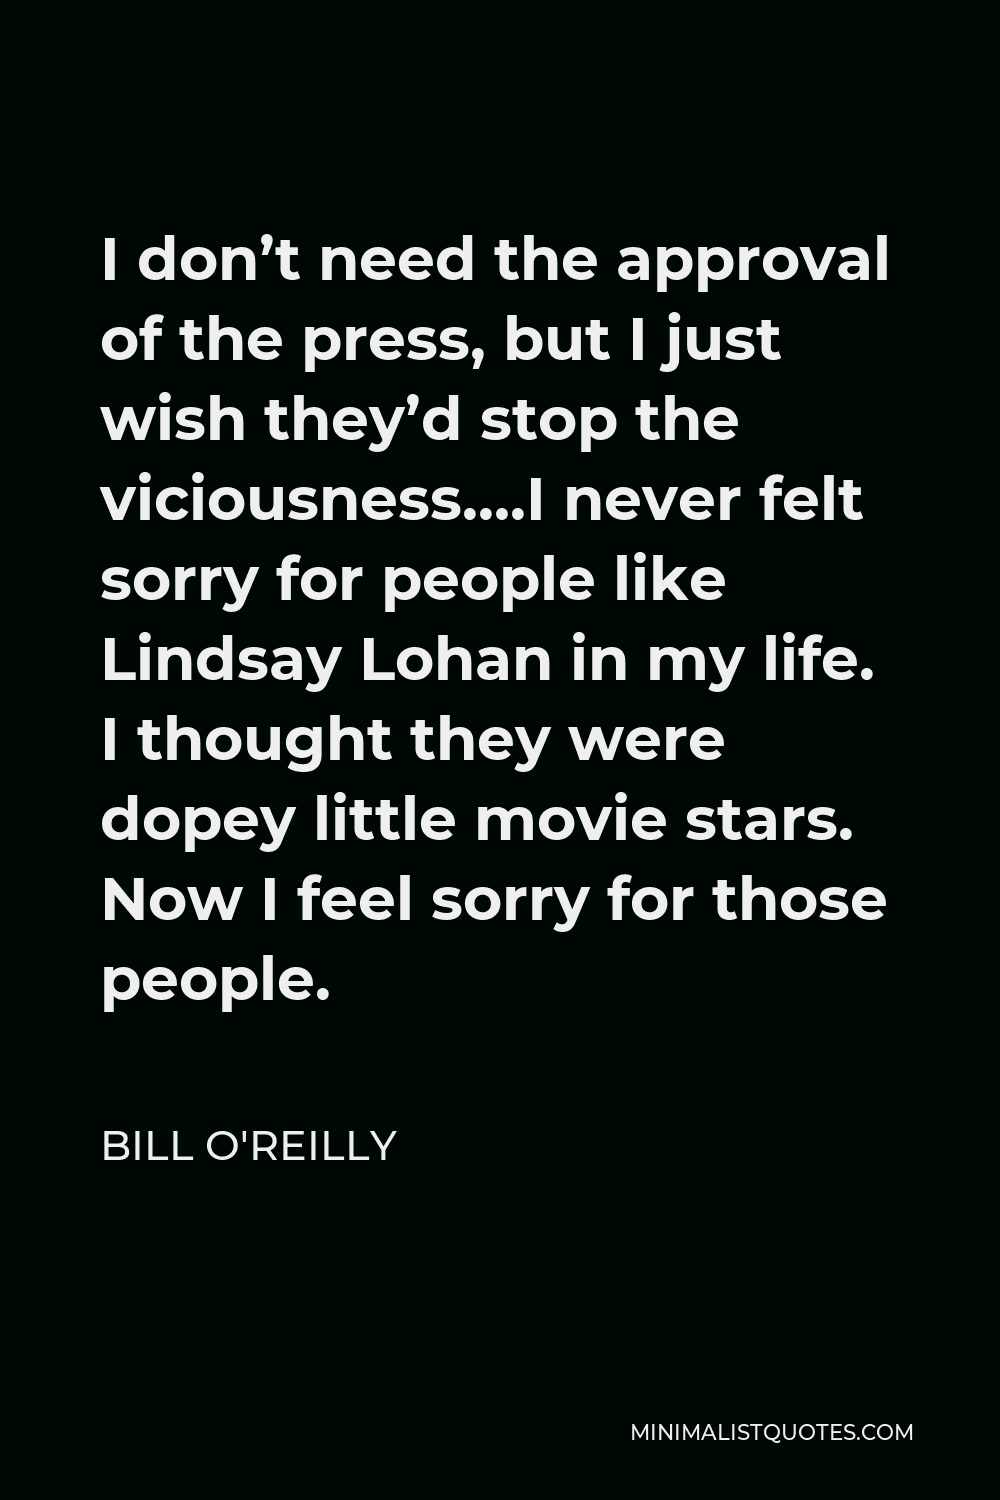 Bill O'Reilly Quote - I don’t need the approval of the press, but I just wish they’d stop the viciousness….I never felt sorry for people like Lindsay Lohan in my life. I thought they were dopey little movie stars. Now I feel sorry for those people.